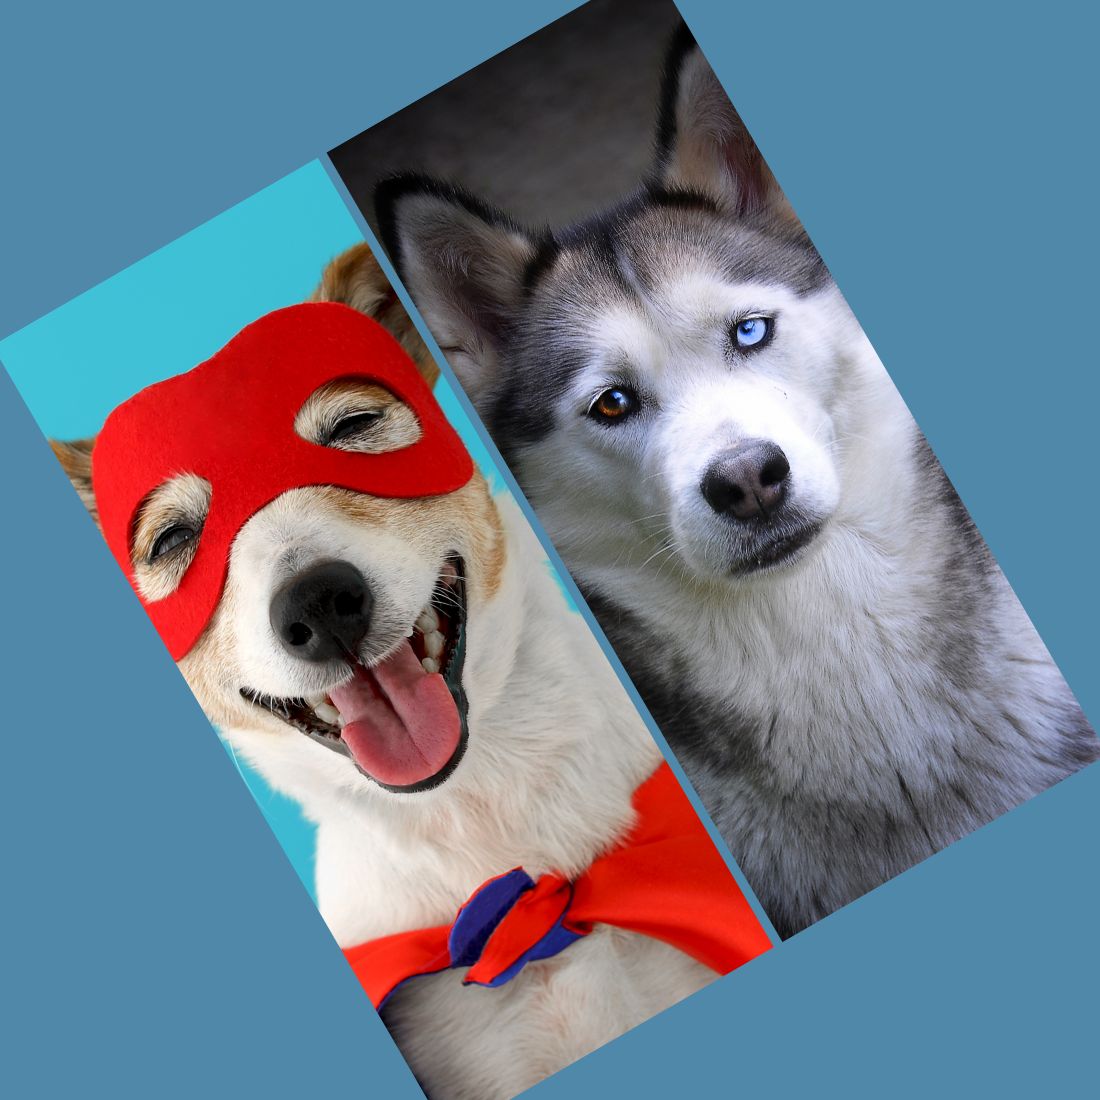 Two pictures of a dog wearing a red mask.